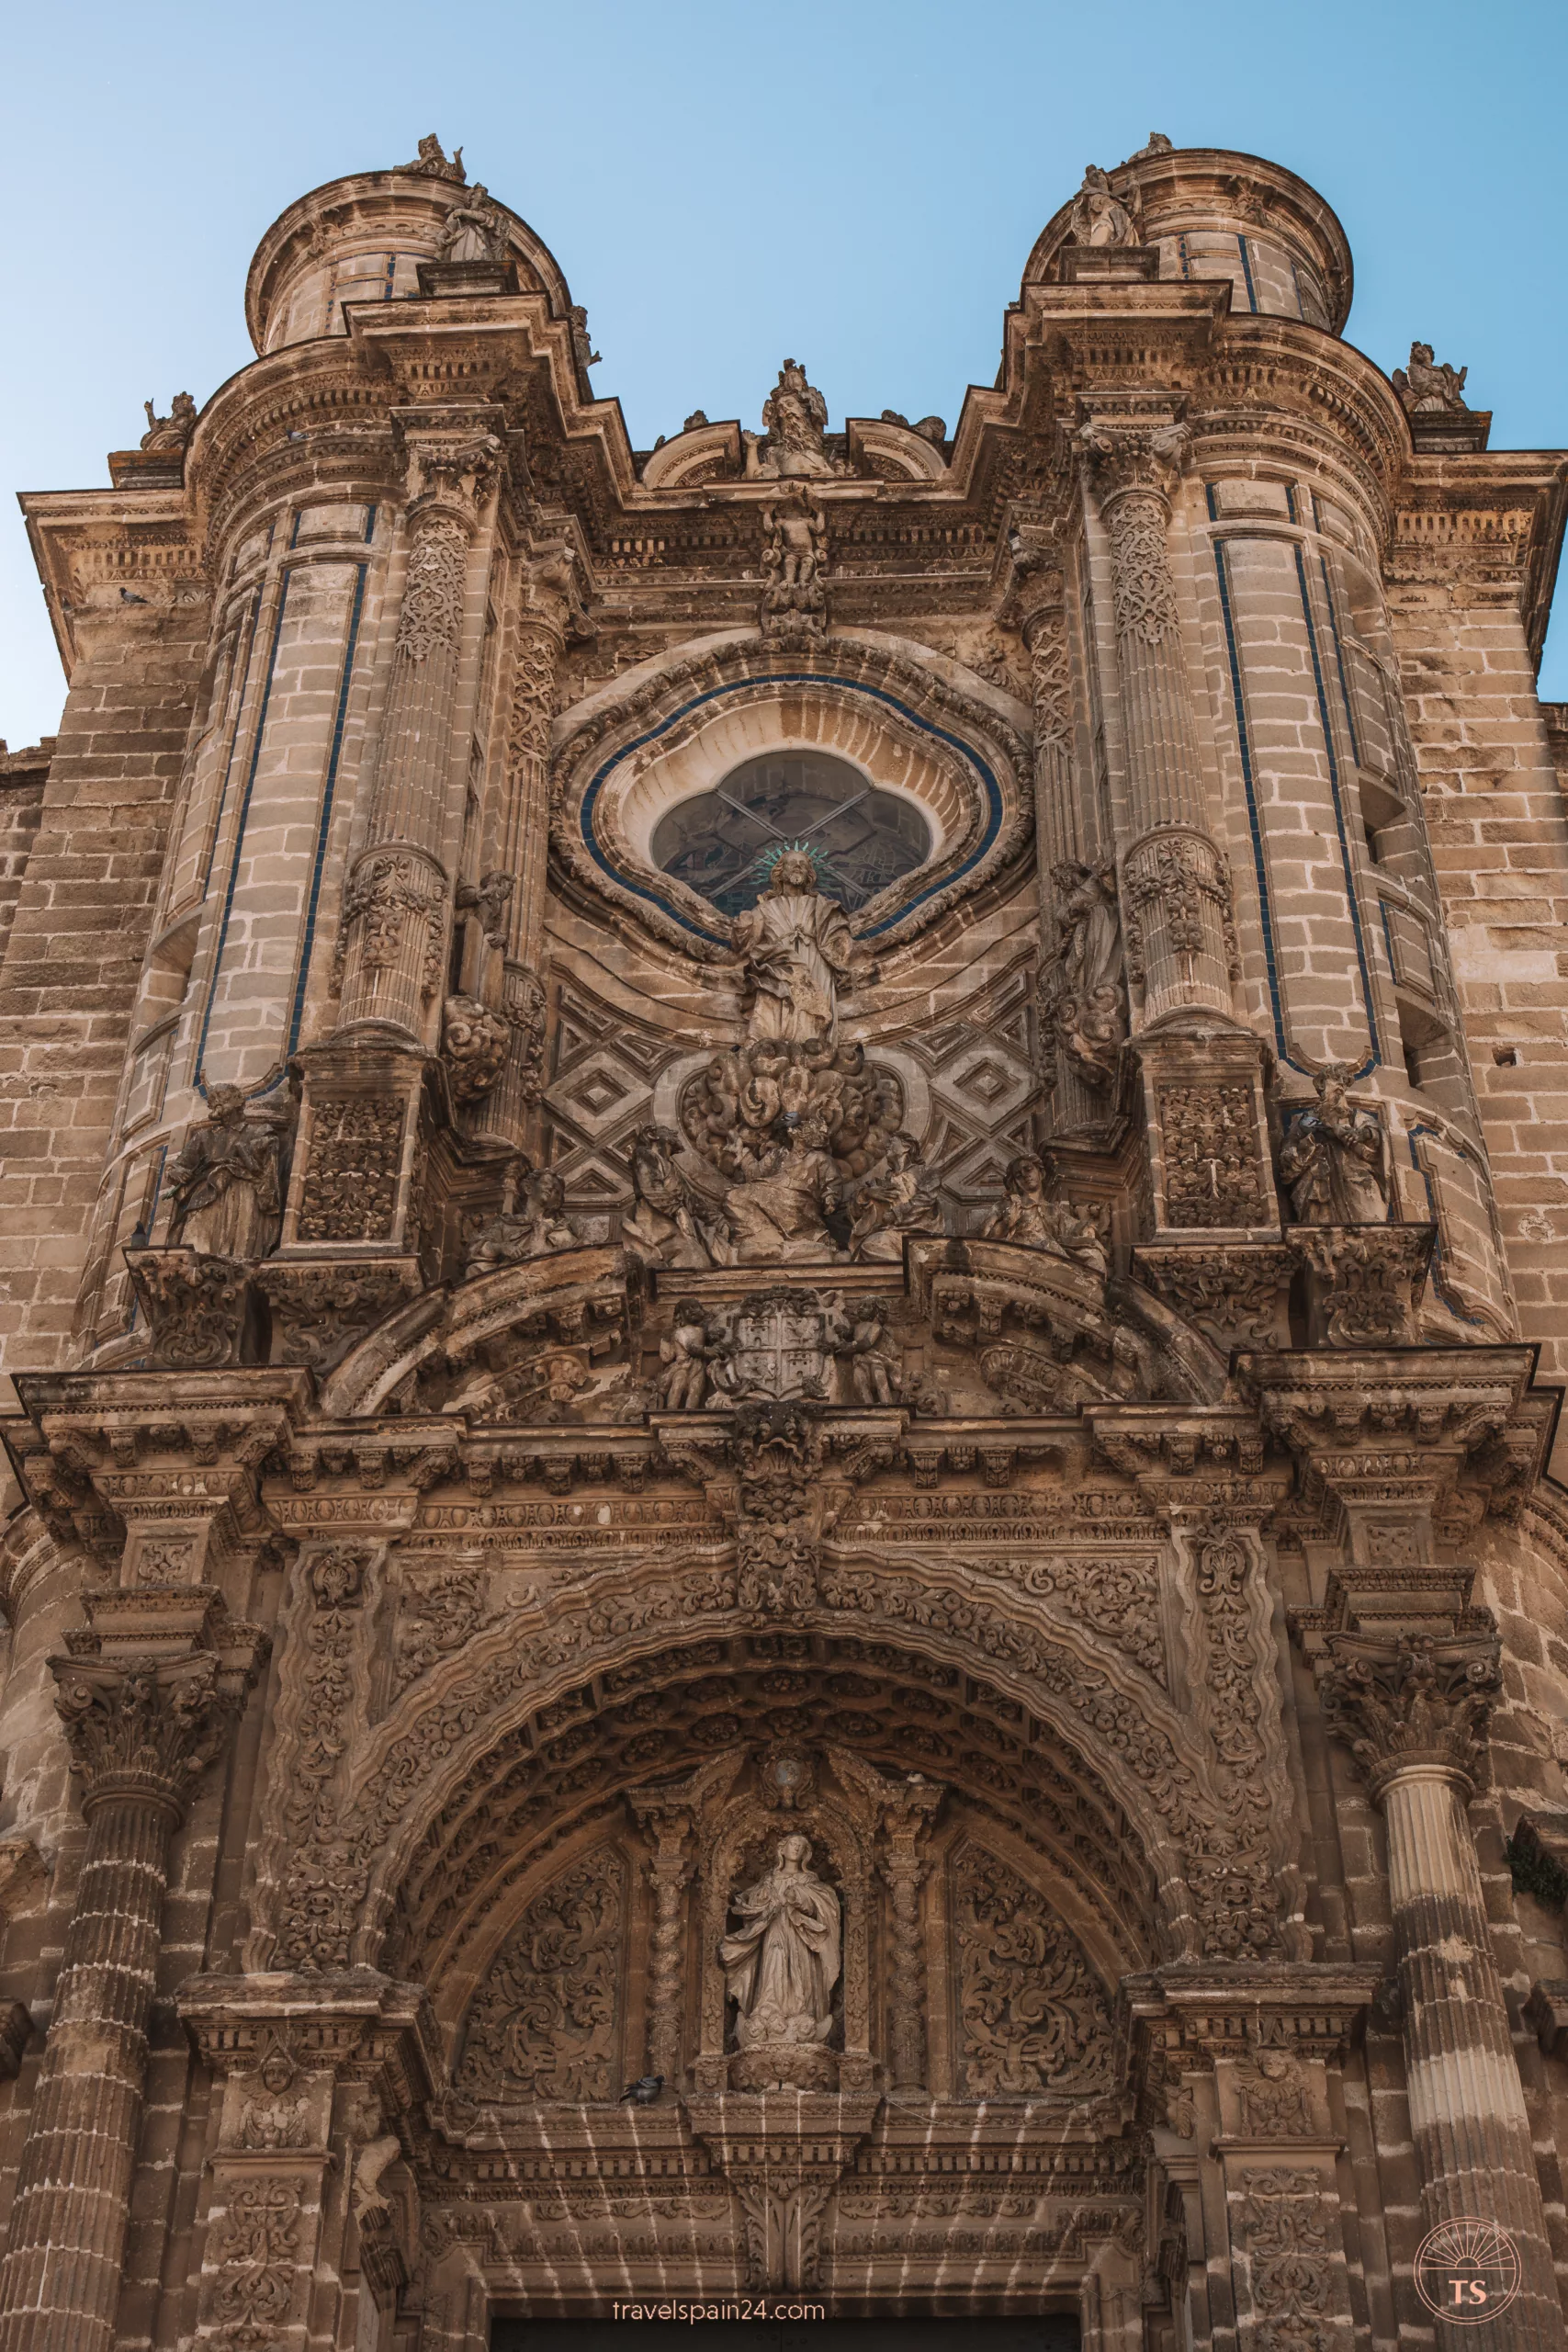 Close-up of the detailed facade of Jerez de la Frontera Cathedral on a sunny day, highlighting the intricate architectural features. This image relates to the post by showcasing one of the city's main attractions.